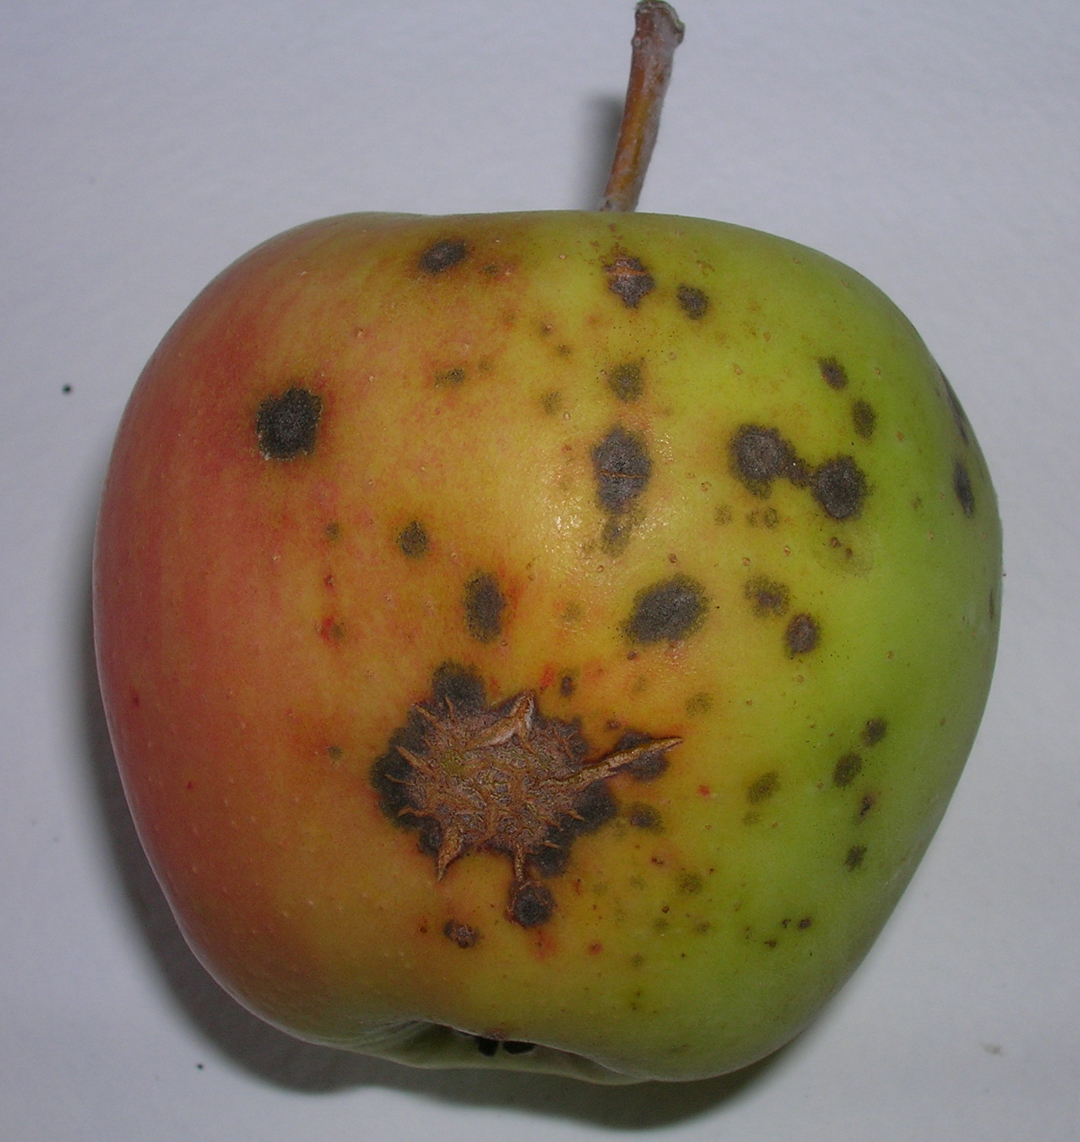 Fruit trees diseases in university extensions services